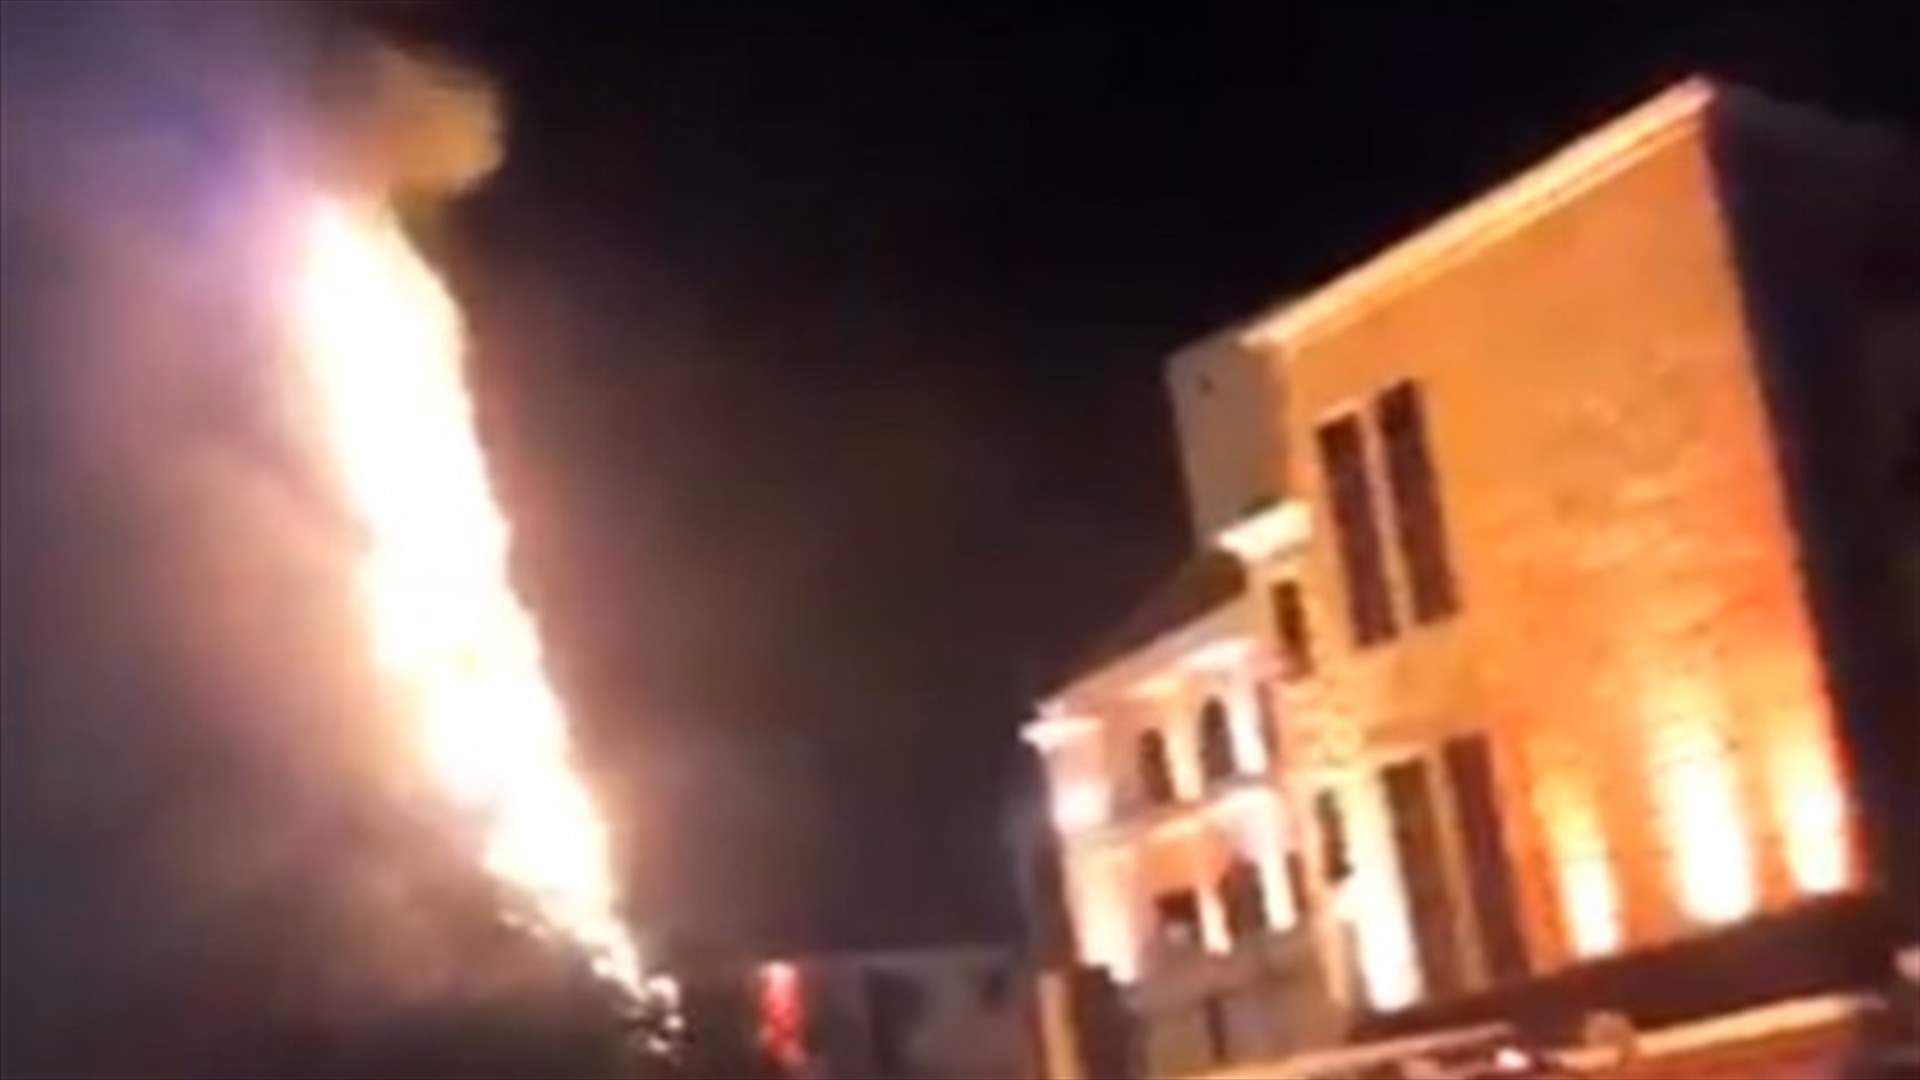 [PHOTOS, VIDEO] Jbeil Christmas tree catches fire